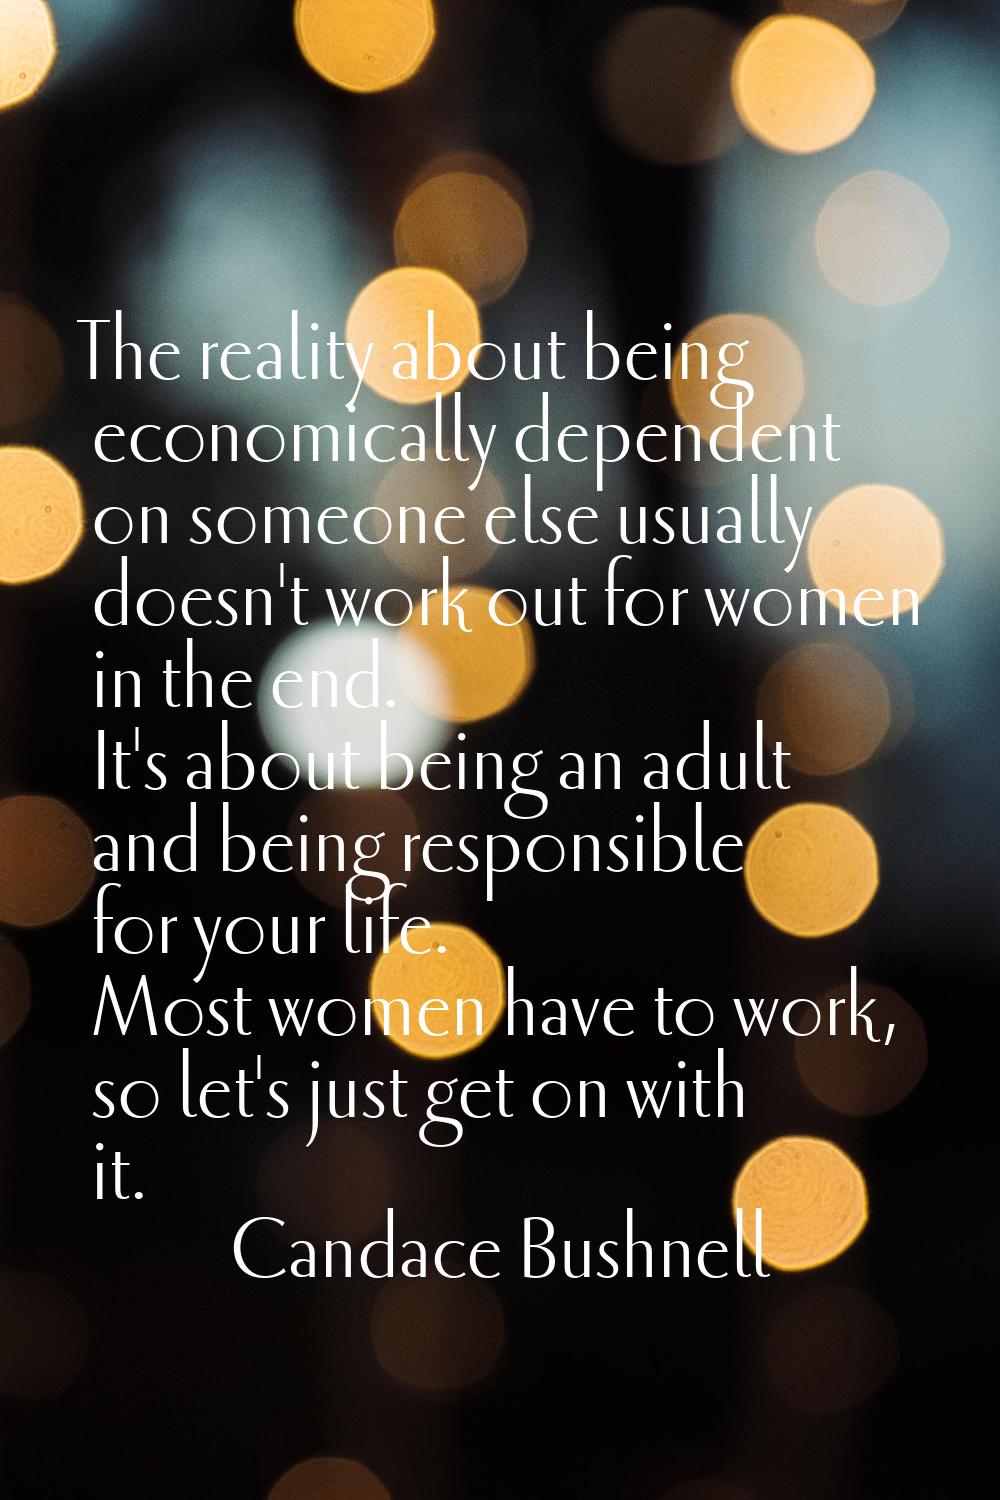 The reality about being economically dependent on someone else usually doesn't work out for women i